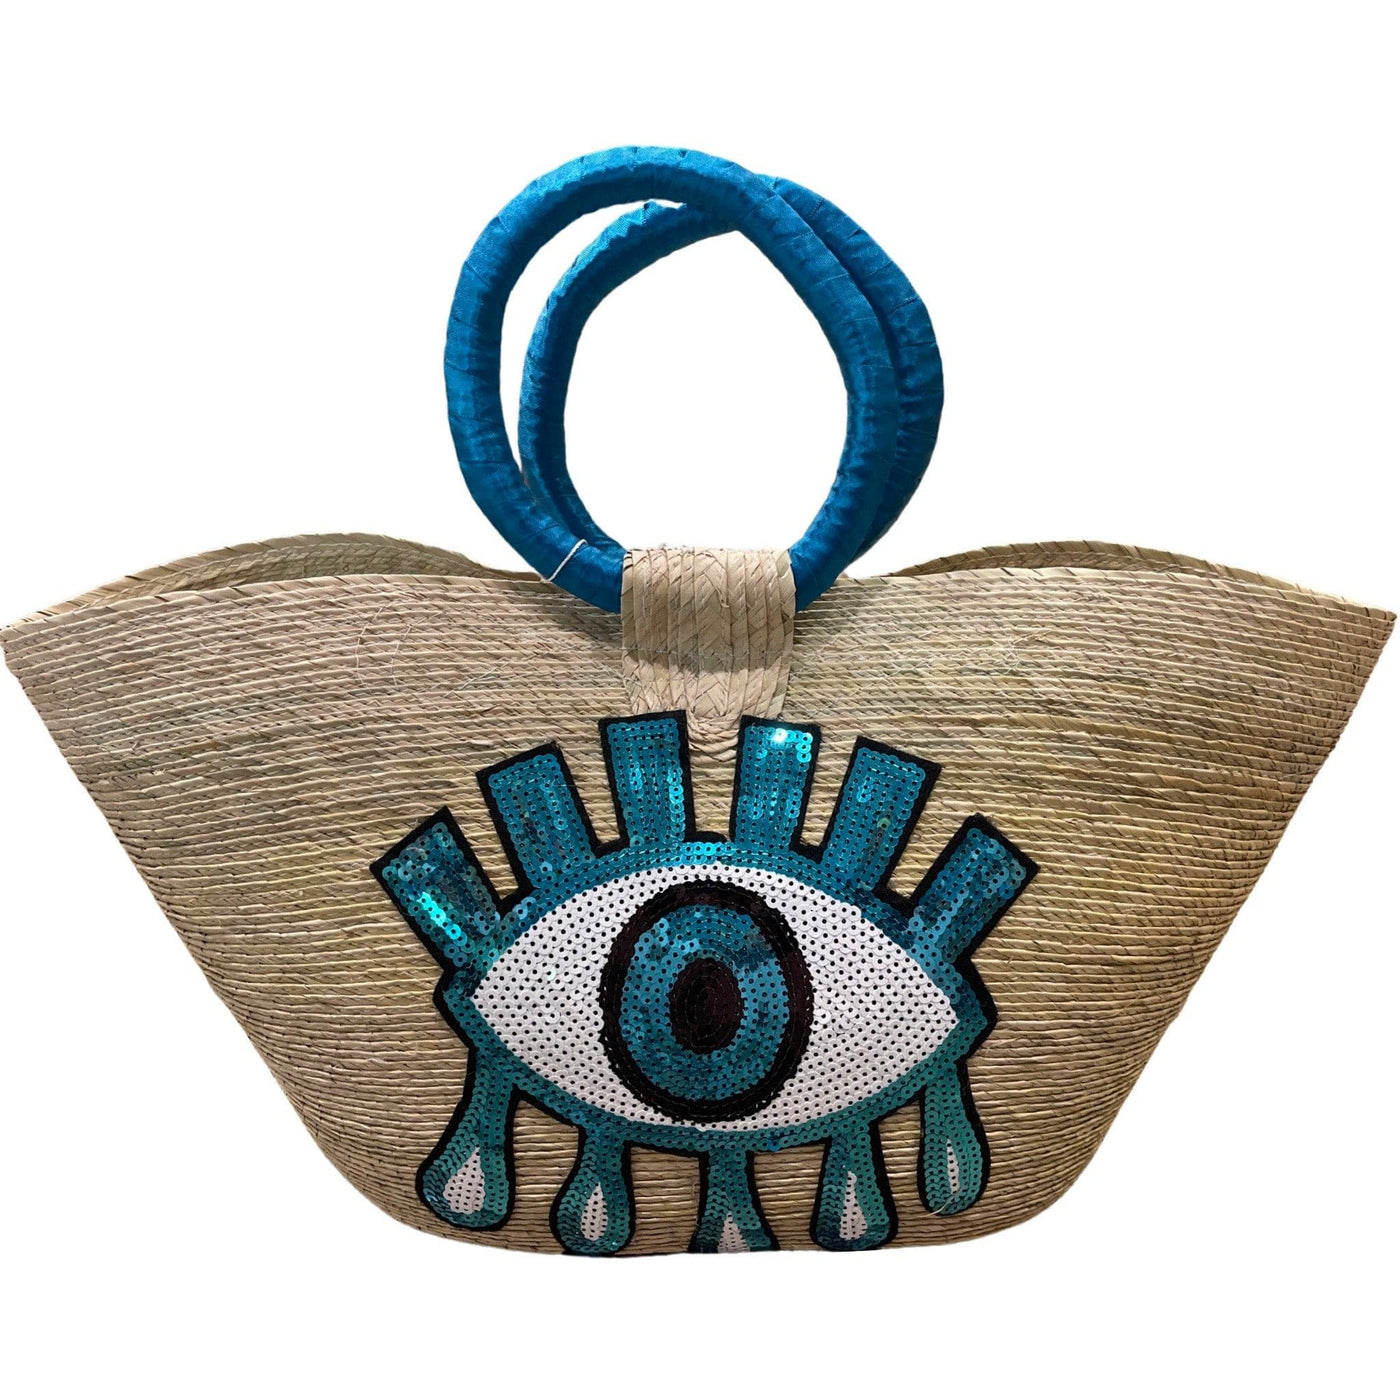 BeeLoved Custom Artisan Bags and Gifts Handbags Teal and White Teal and White Evil Eye Palm Tote